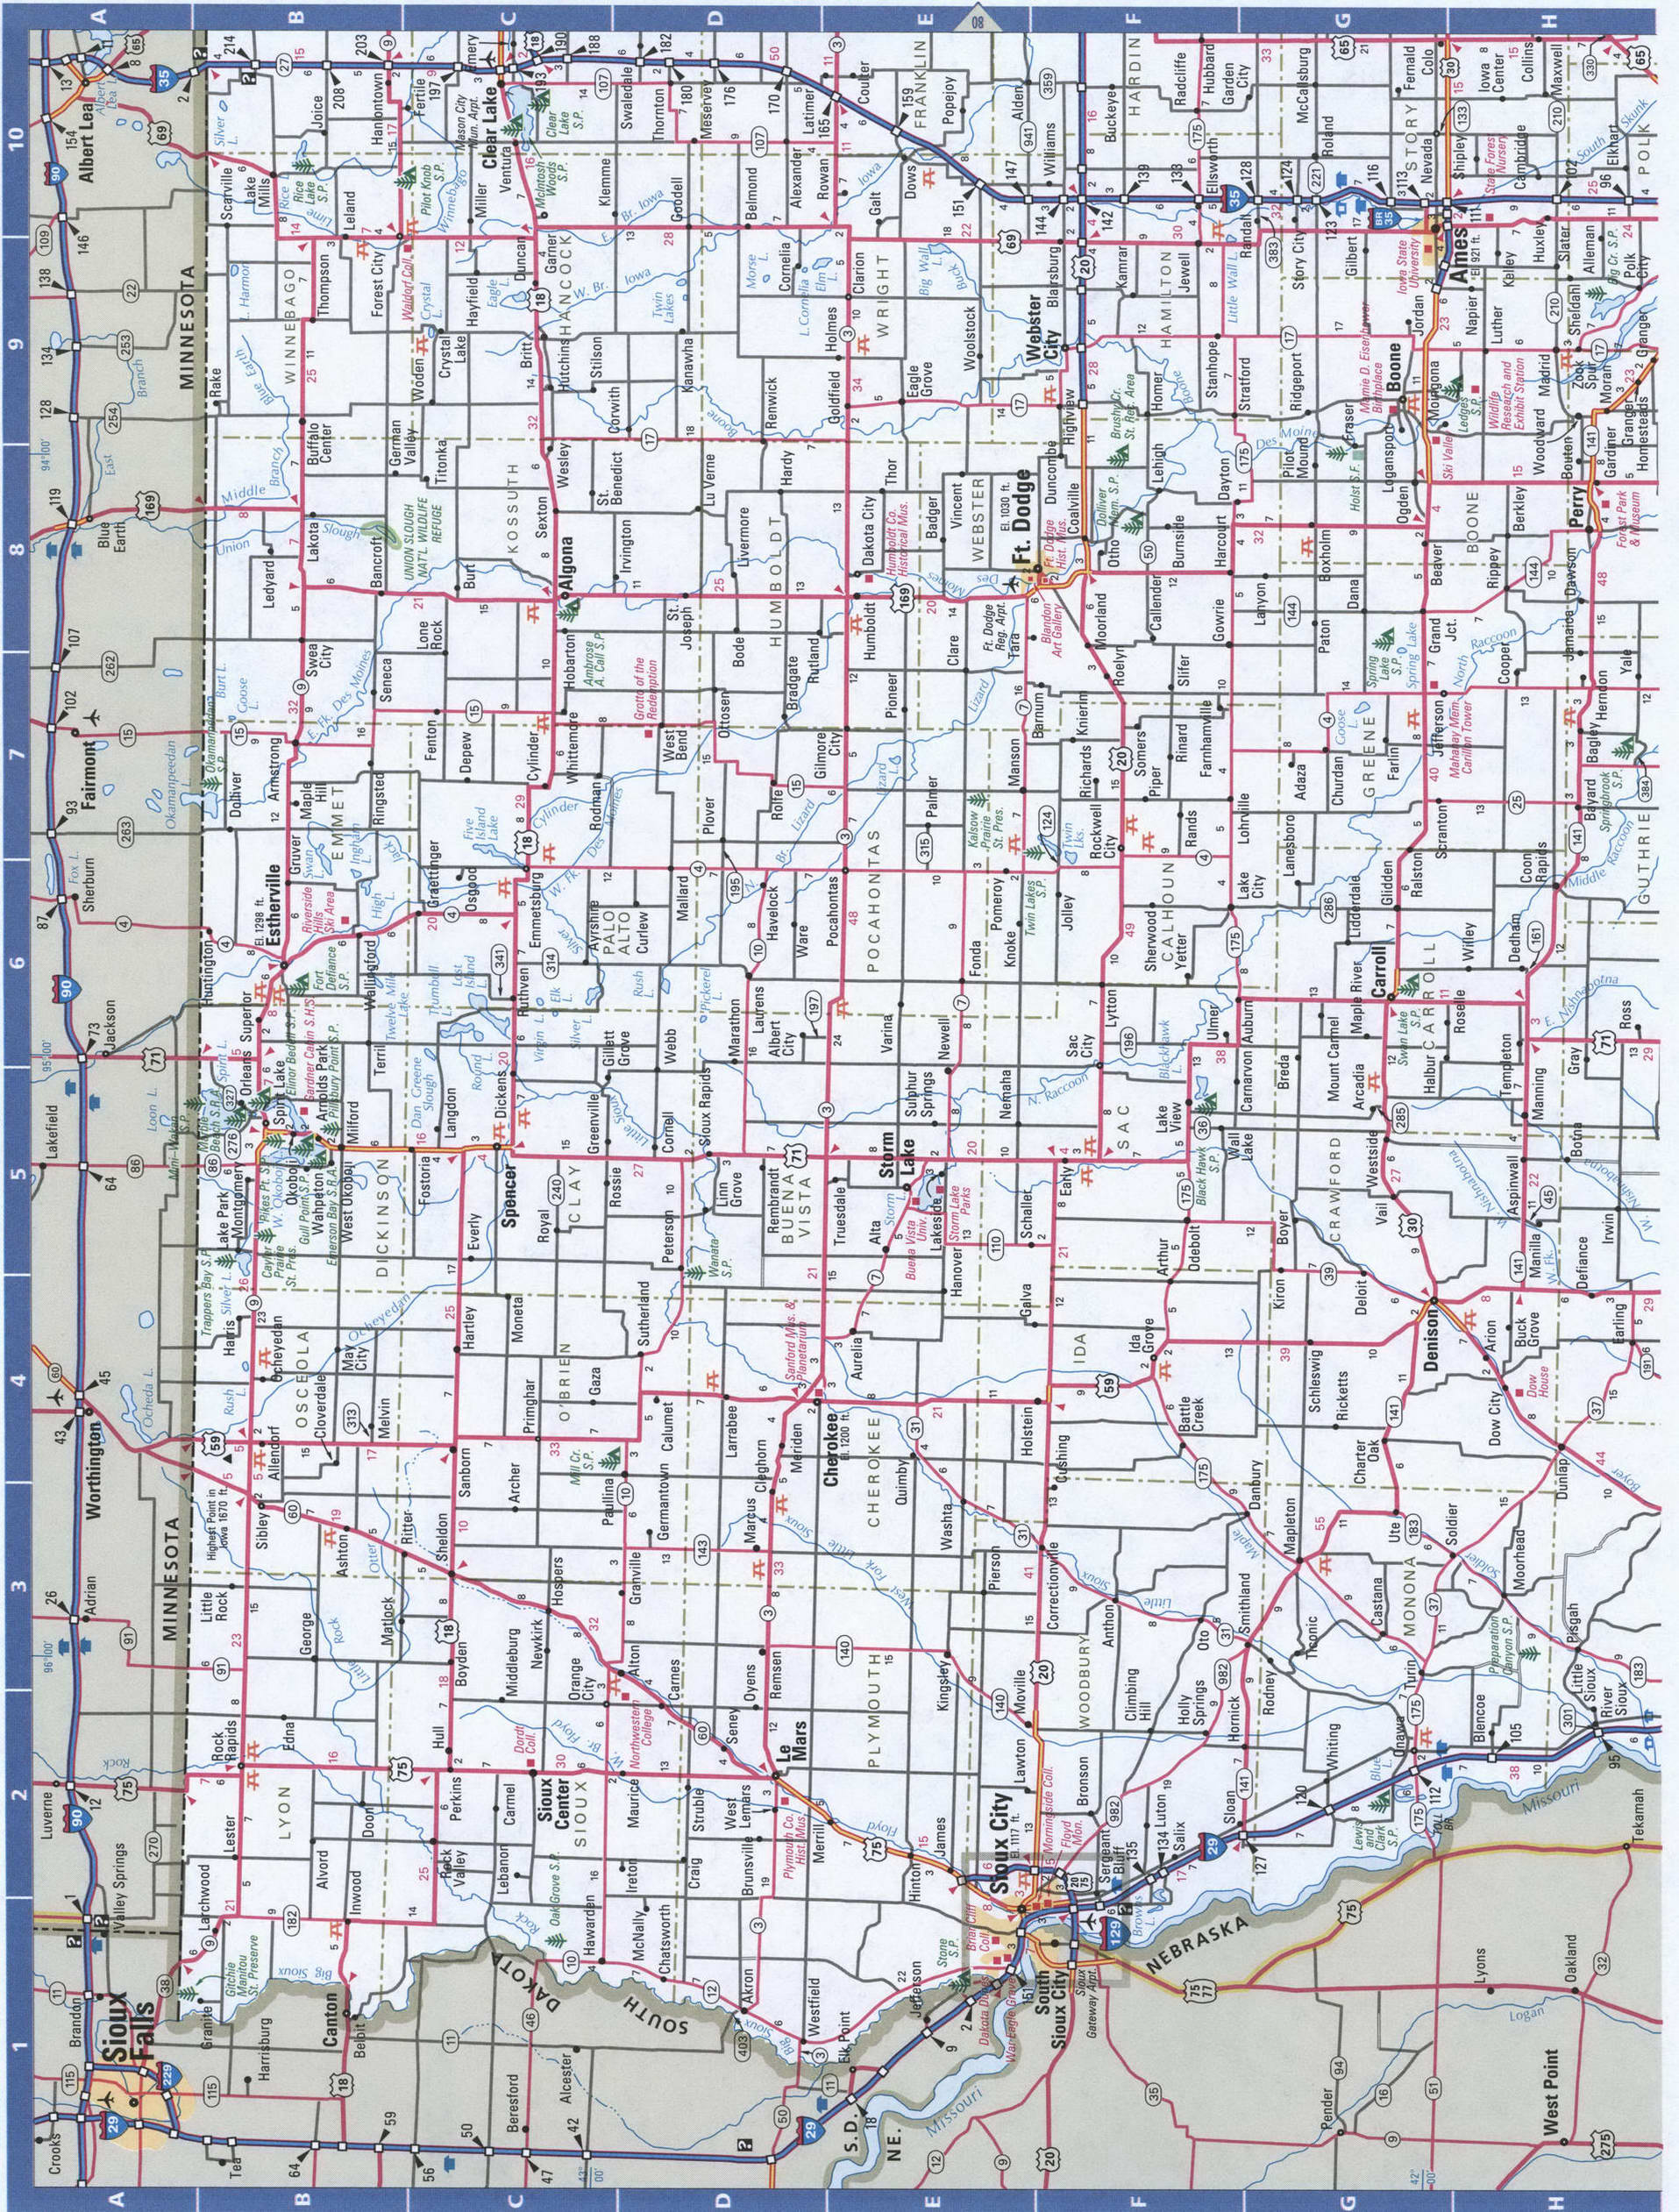 Western Iowa highway roads map.Map of West Iowa cities and highways